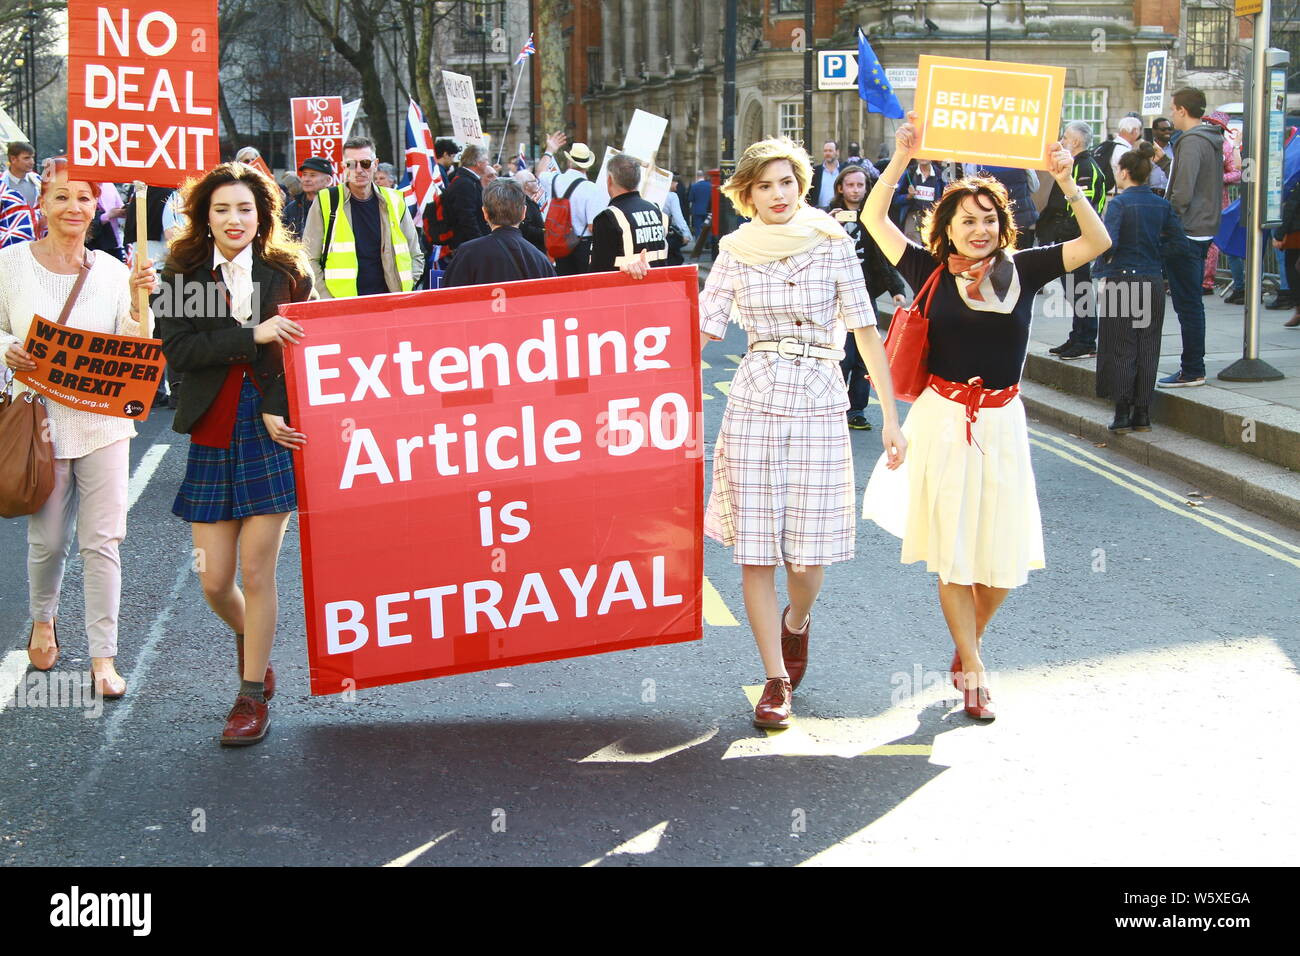 EXTENDING ARTICLE 50 IS BETRAYAL SIGN BEING CARRIED THROUGH THE STREETS OF WESTMINSTER AT A PUBLIC DEMONSTRATION. OTHER SIGNS HELD UP INCLUDE NO DEAL BREXIT , NO TO 2ND REFERENDUM AND BELIEVE IN BRITAIN. DEVIDED NATION. DEVIDED BRITAIN. STREET LIFE. PROTESTS. FREEDOM OF SPEECH. RUSSELL MOORE PORTFOLIO PAGE. Stock Photo